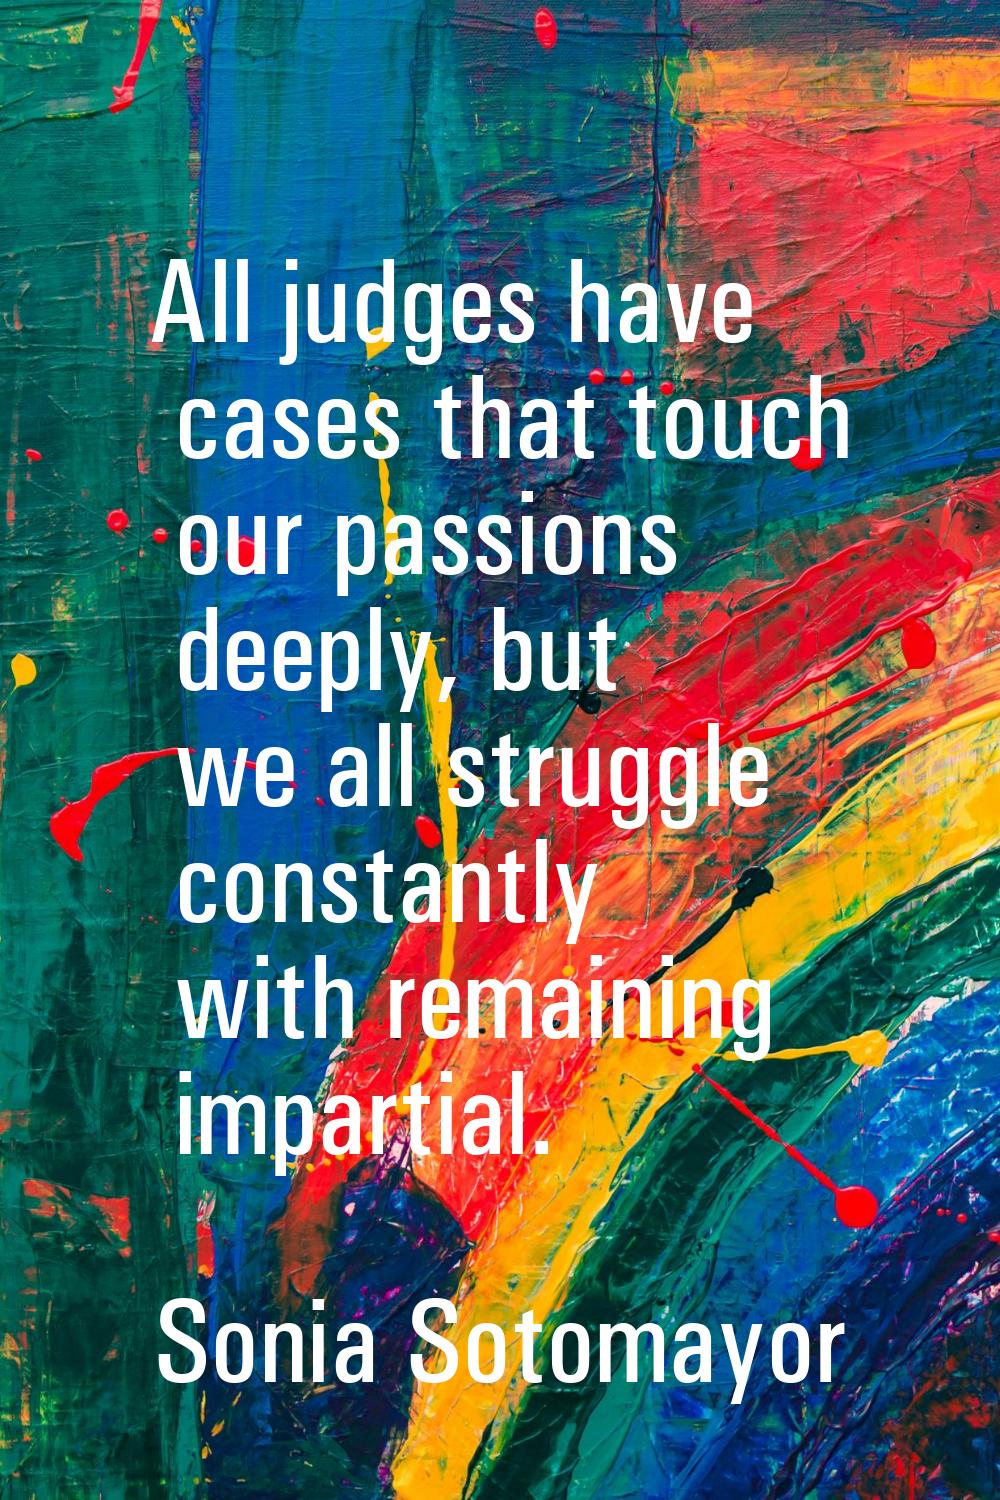 All judges have cases that touch our passions deeply, but we all struggle constantly with remaining